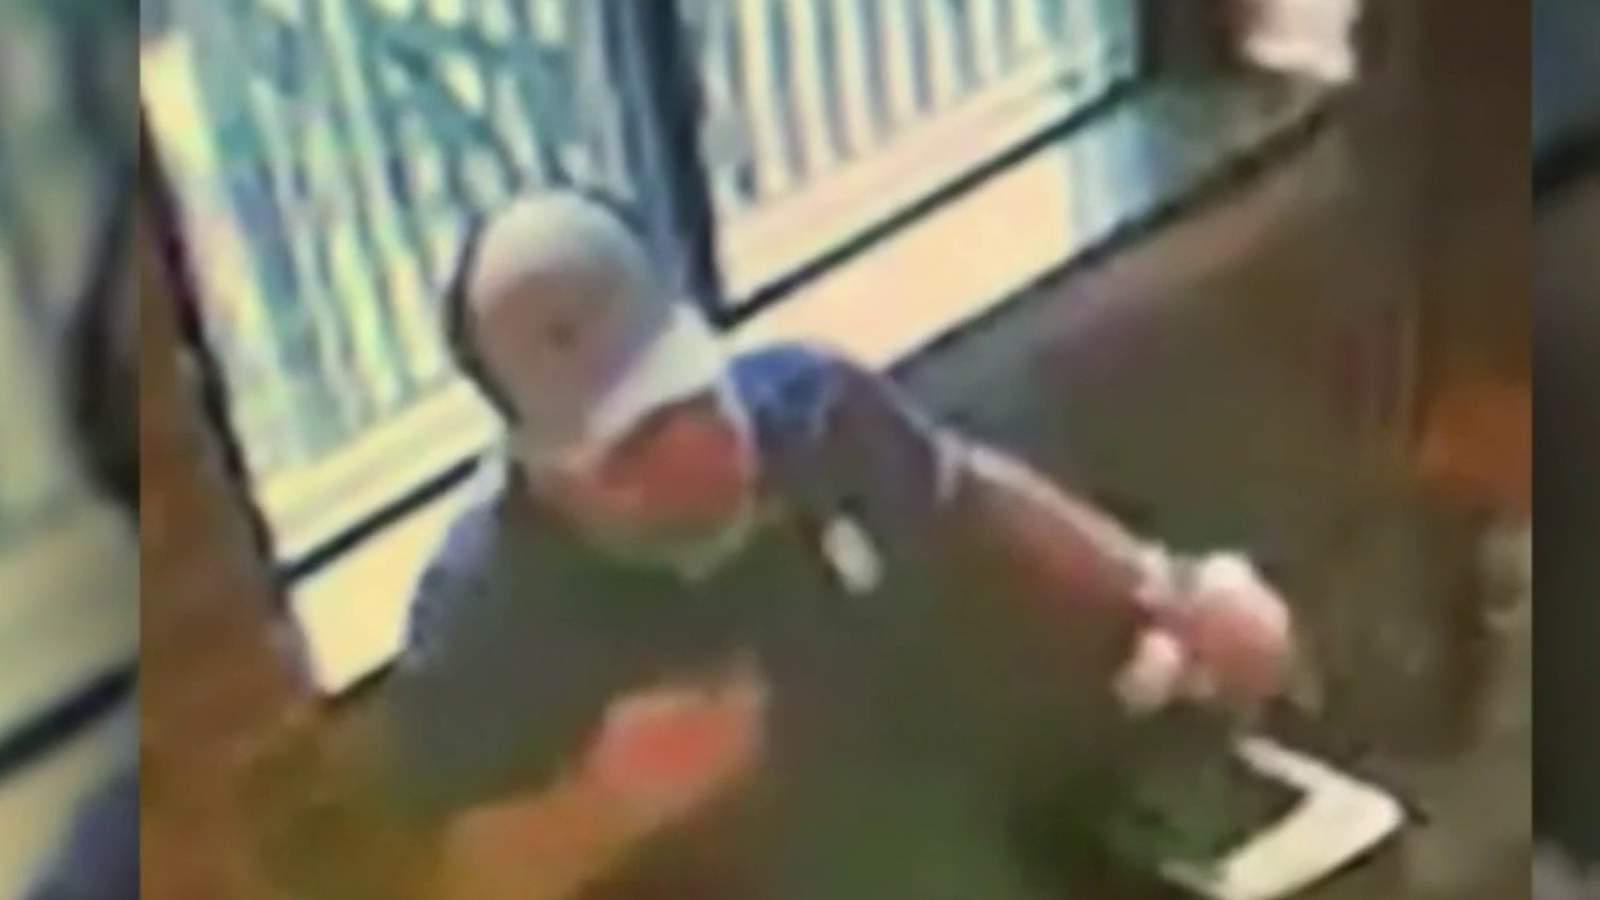 Video shows customer stealing from Whiskeys on the Water server